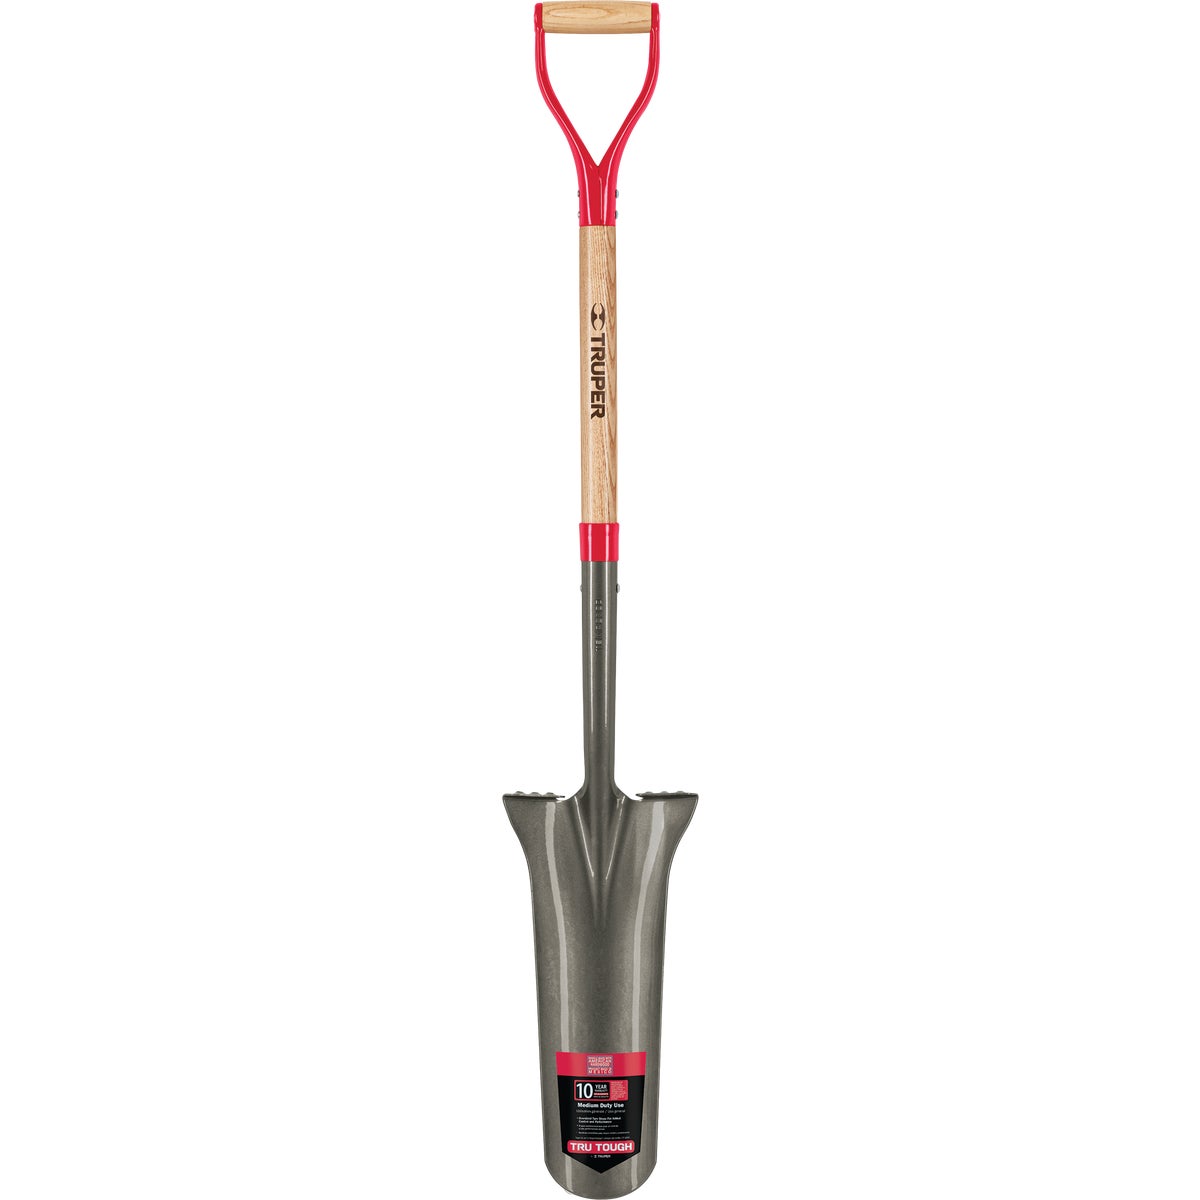 Item 700385, Tru Tough D-handled drain spade is designed for digging narrow trenches, 